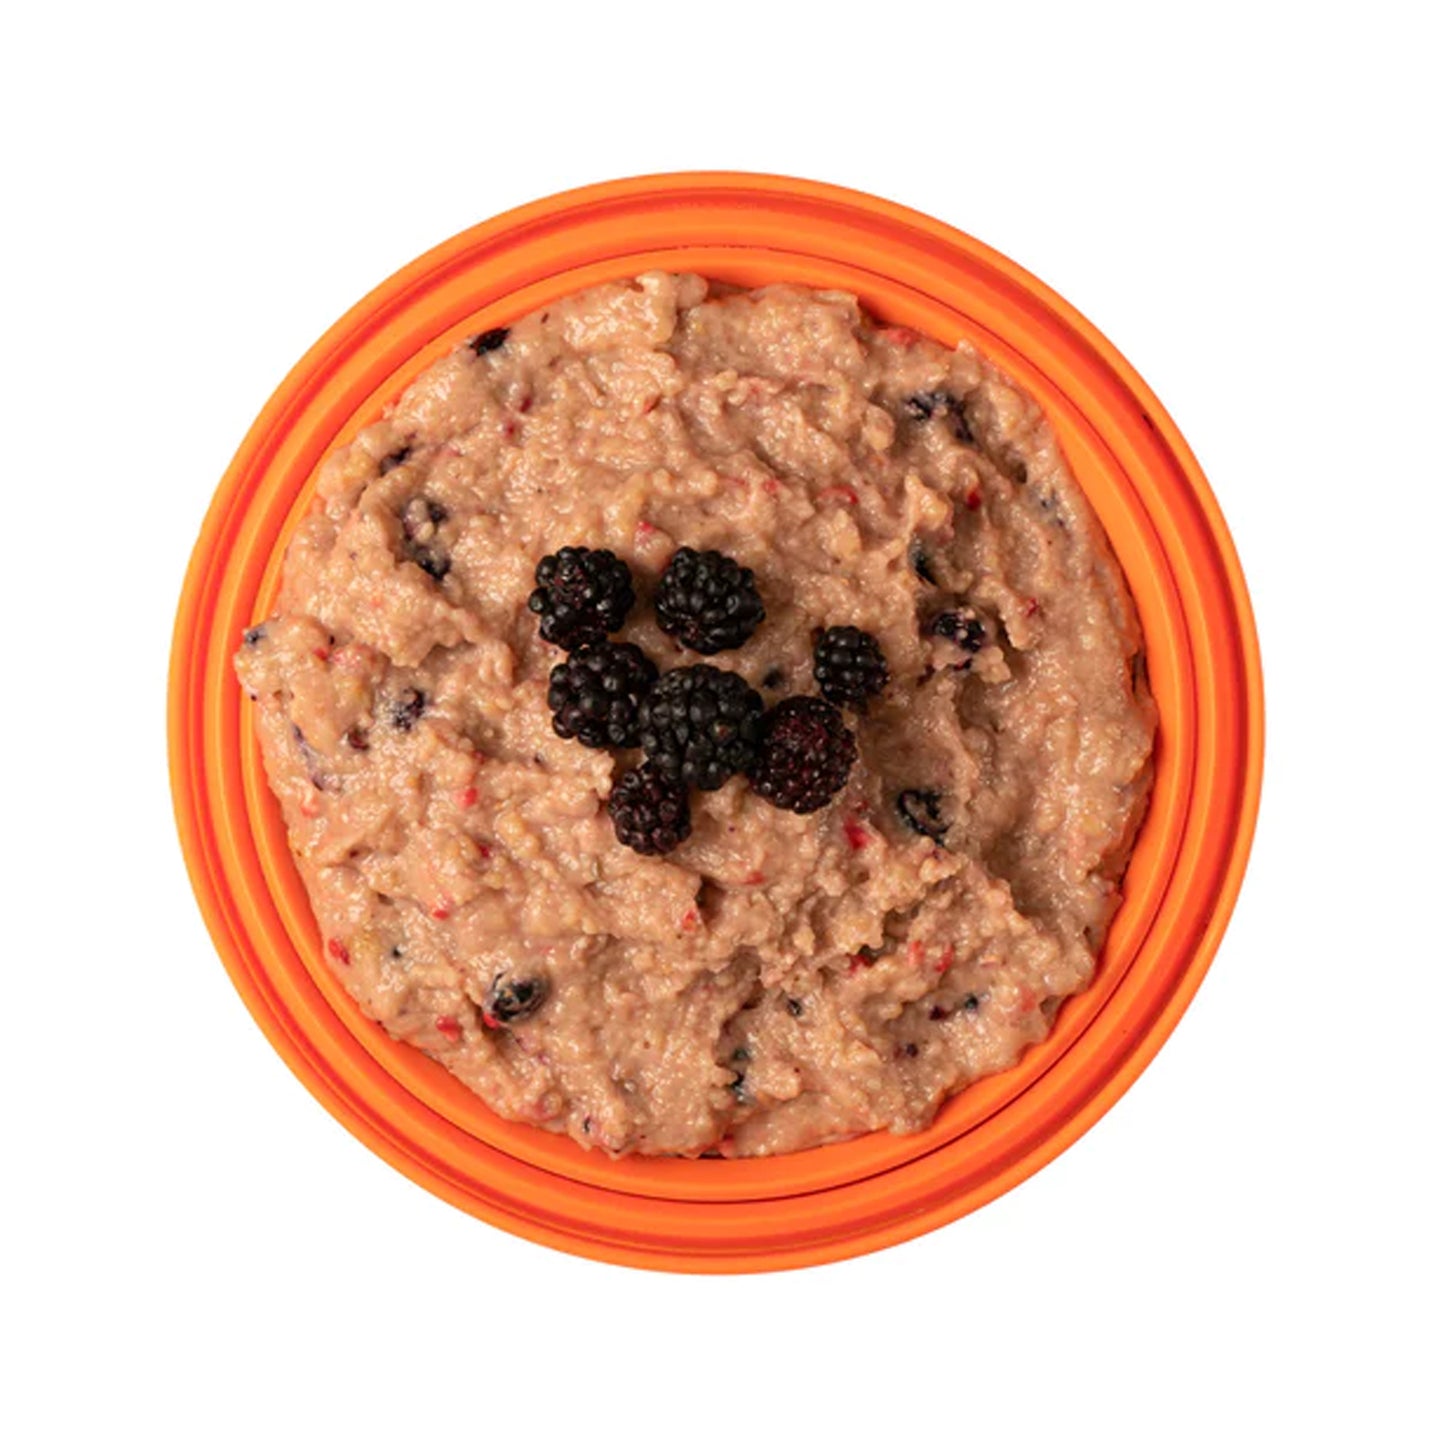 Expedition Foods Custard with Mixed Berries Pudding Meal